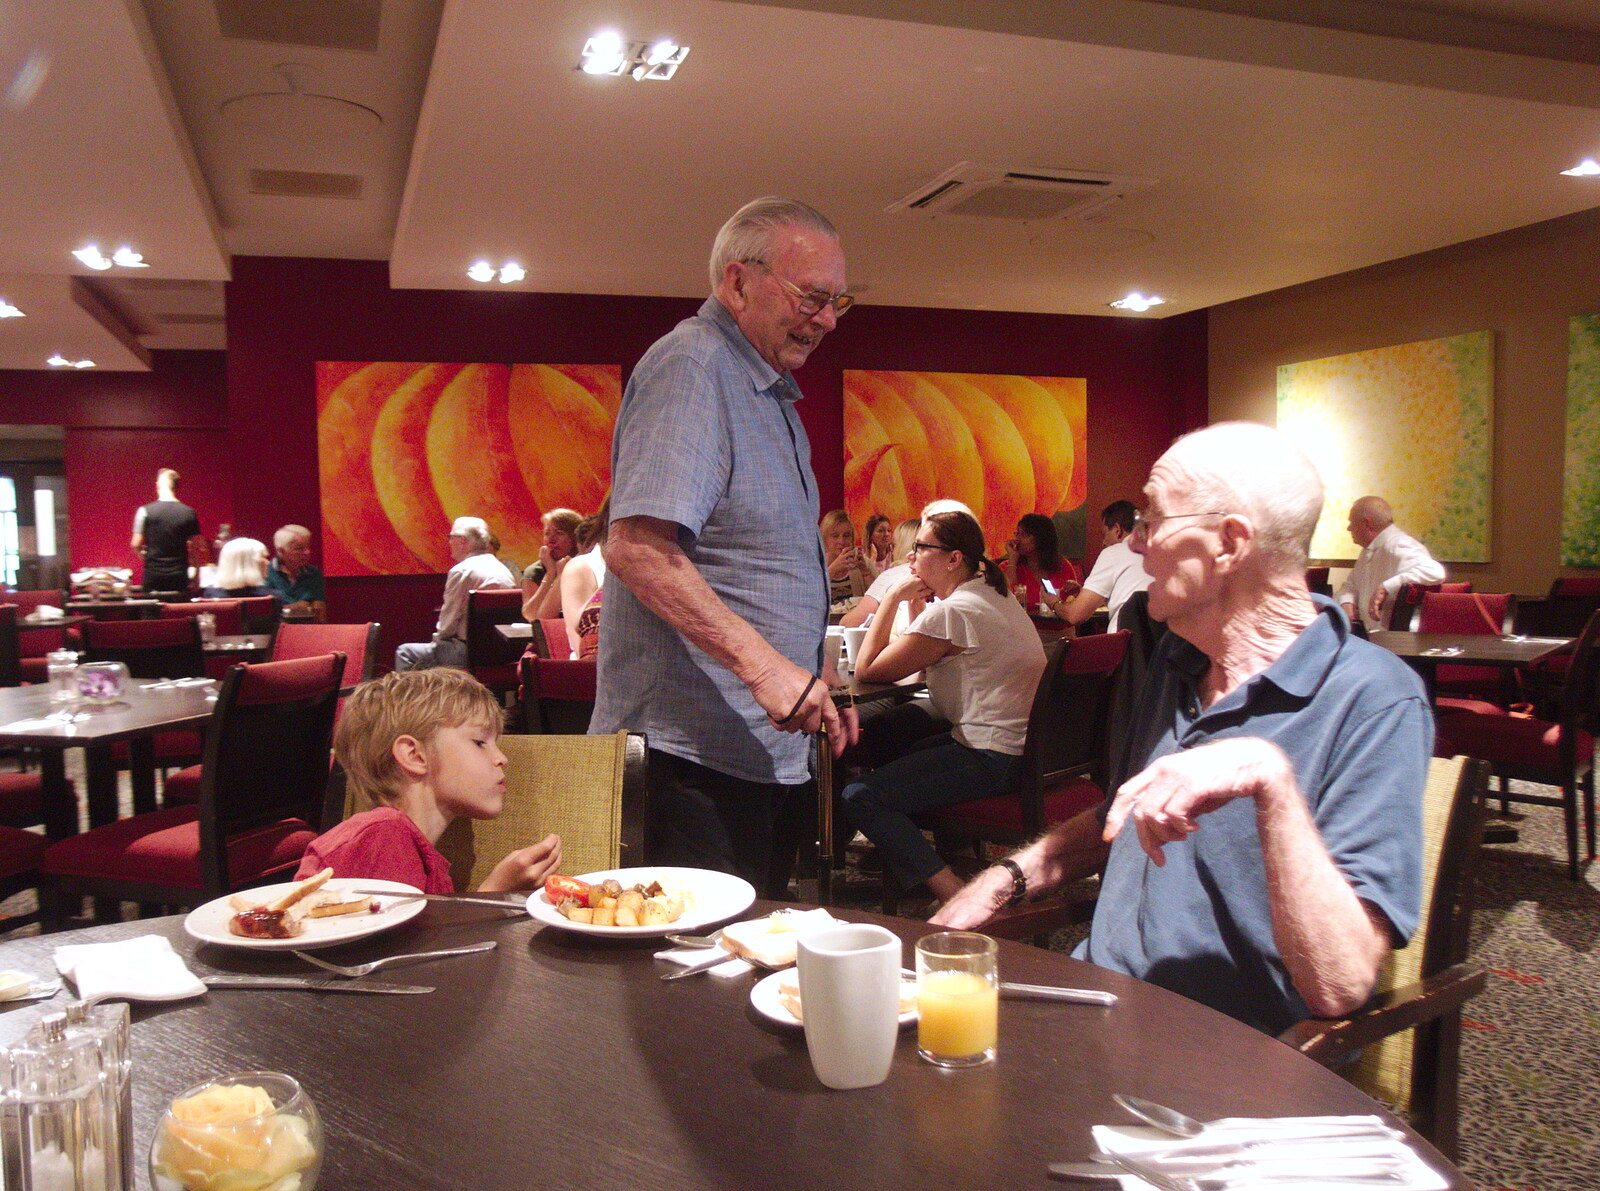 One of Grandad's mates comes over for a chat from Kenilworth Castle and the 69th Entry Reunion Dinner, Stratford, Warwickshire - 14th September 2019